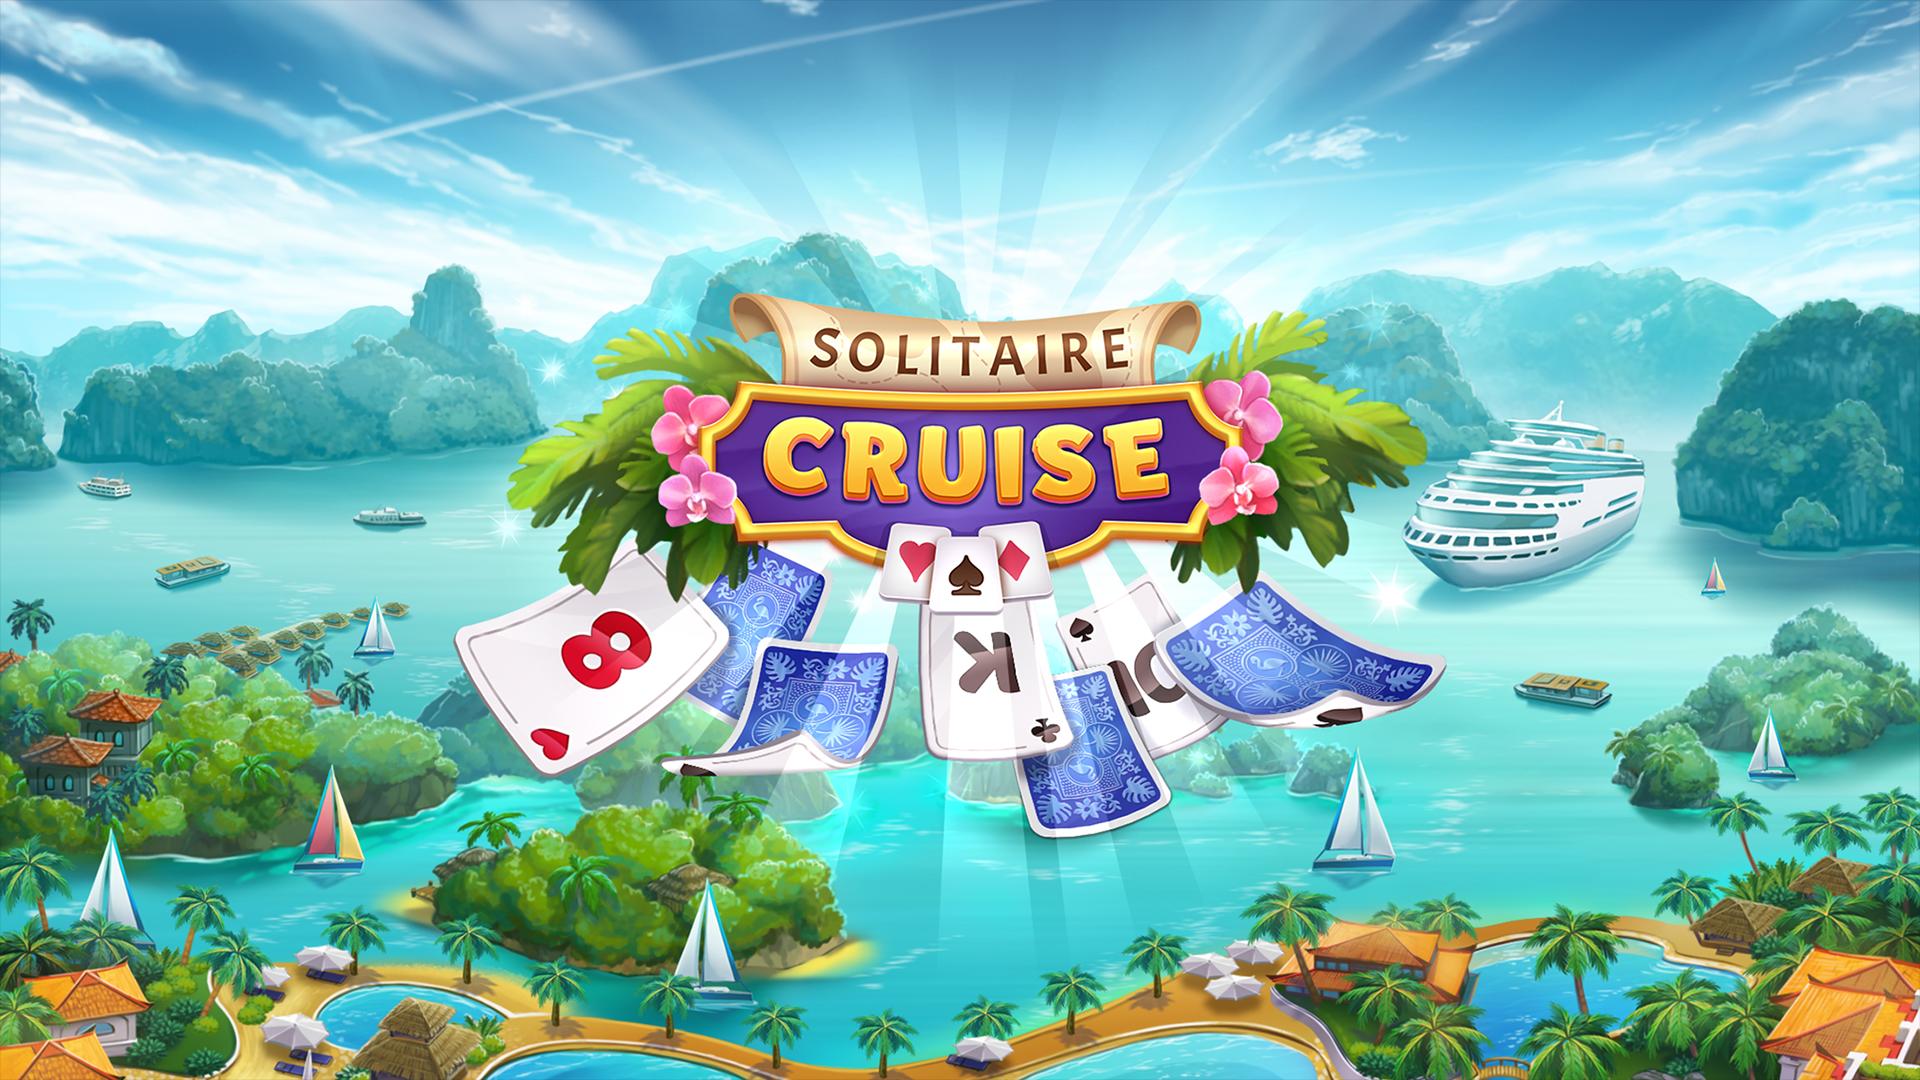 solitaire-cruise-game-classic-tripeaks-card-games-2-2-0-apk-download